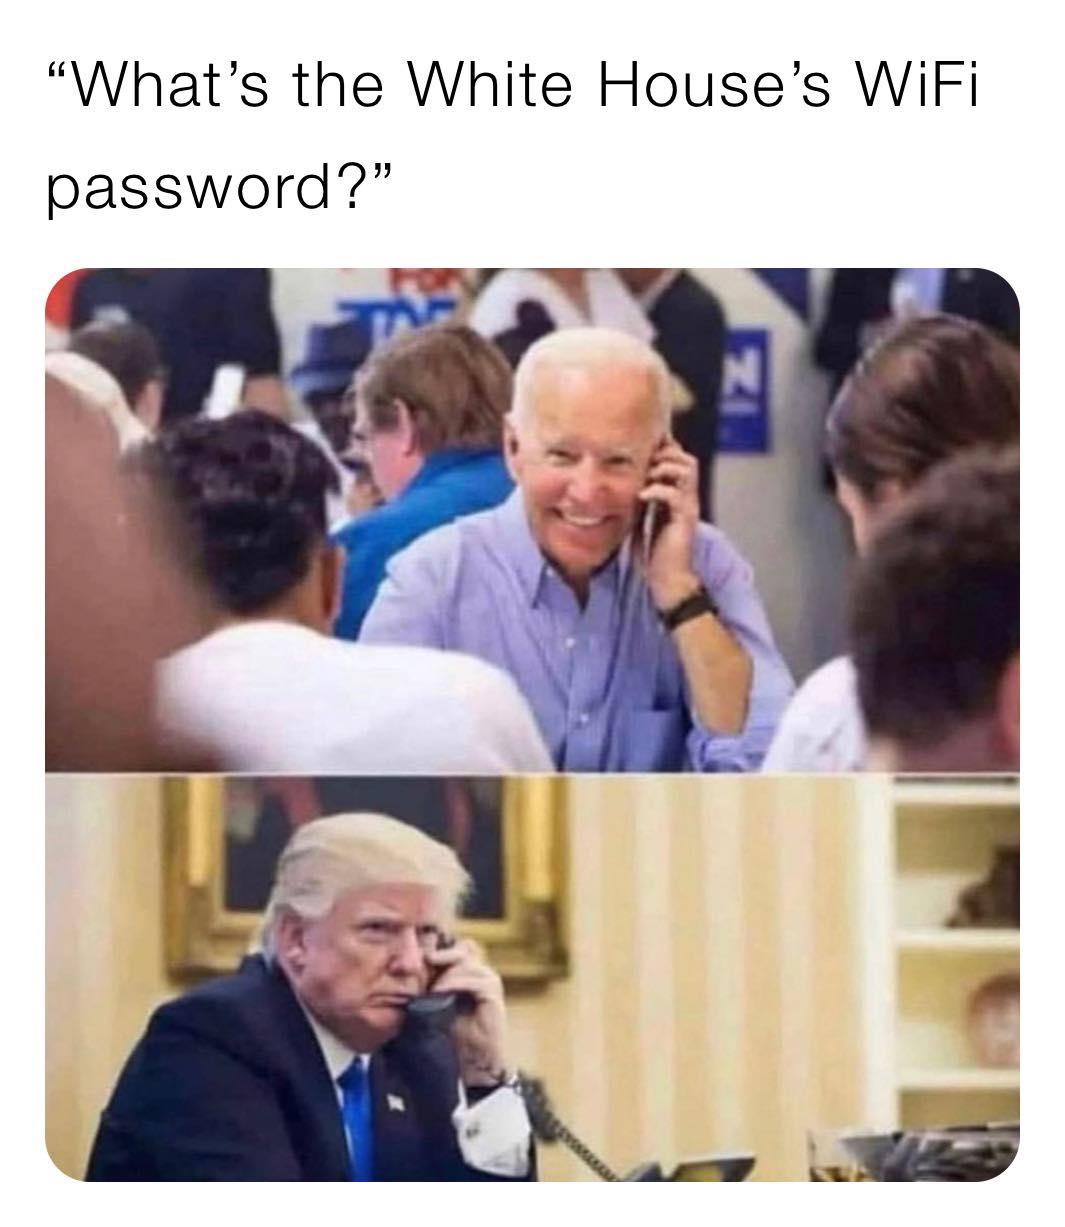 what's the white house wifi - "What's the White House's WiFi password?" N